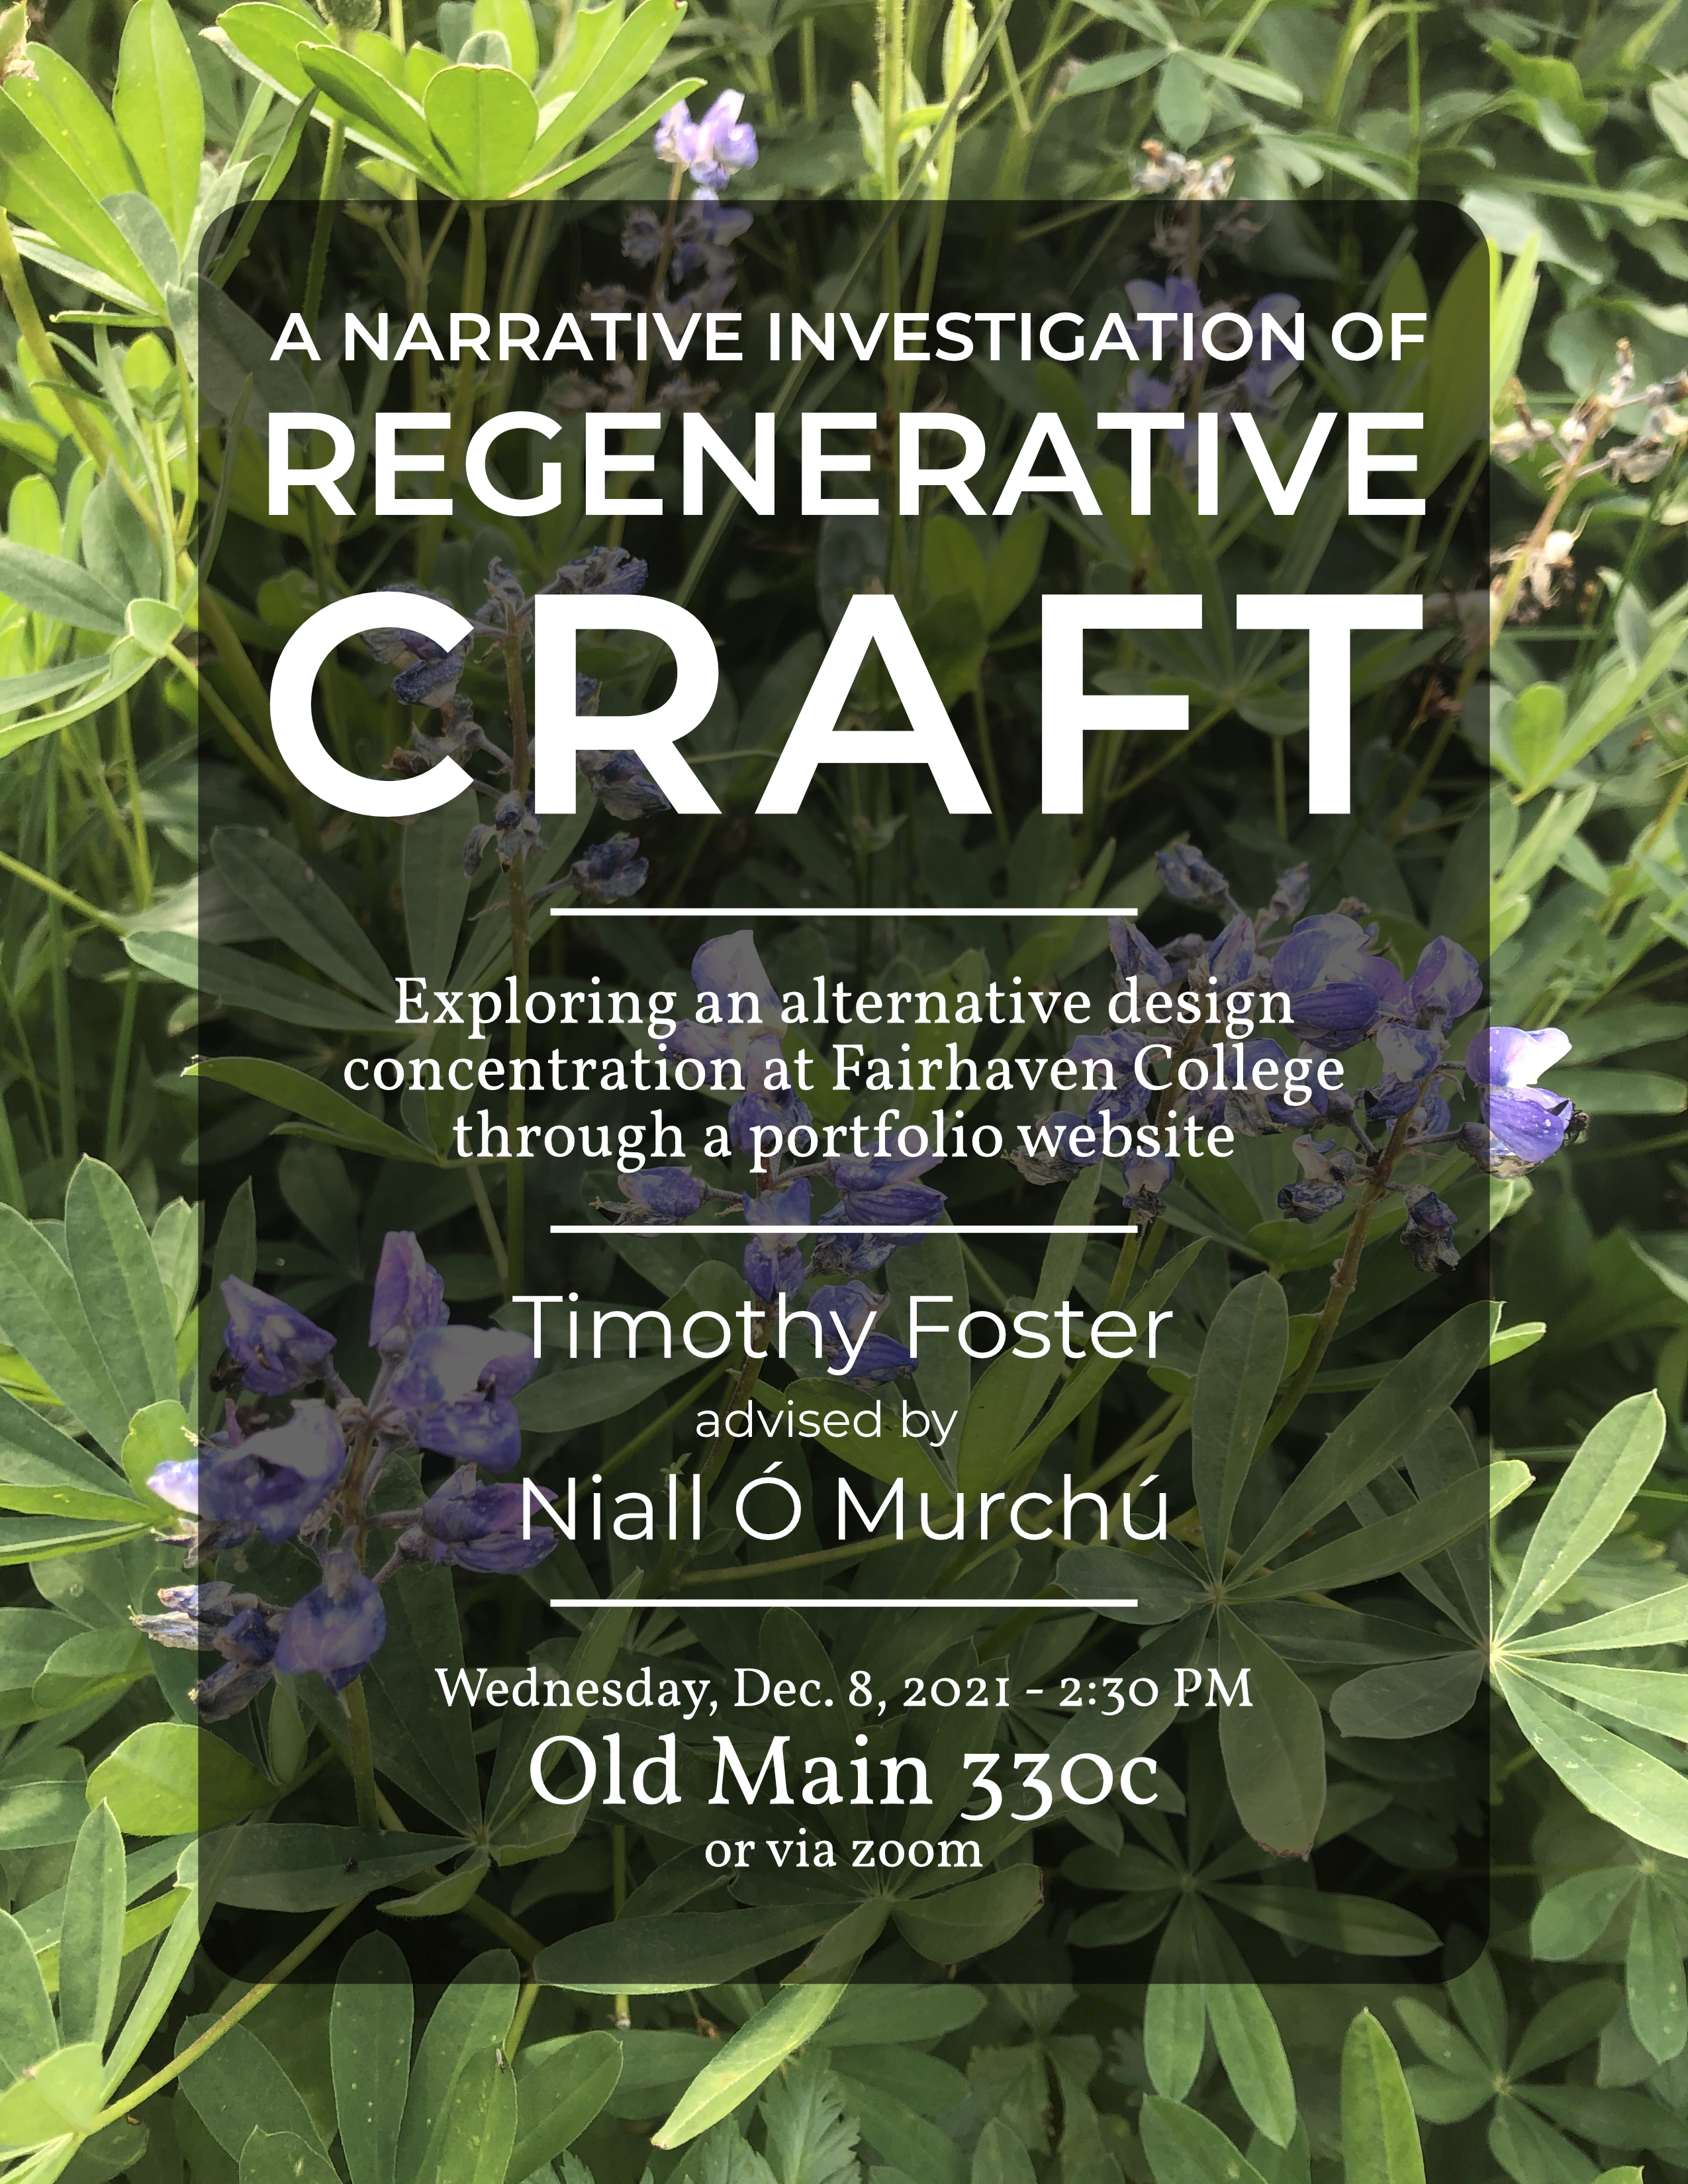 Poster with background image of flowering lupine plant. Title “A Narrative Investigation of Regenerative Craft.” Subtitle reads “exploring an alternative design concentration at Fairhaven College through a portfolio website. Presenting student is Timothy Foster advised by Professor Niall O Murchu. Date and time of presentation are Wednesday, December 8, 2021 at 2:30 p.m. Presentation located in Old Main 330C or over zoom."